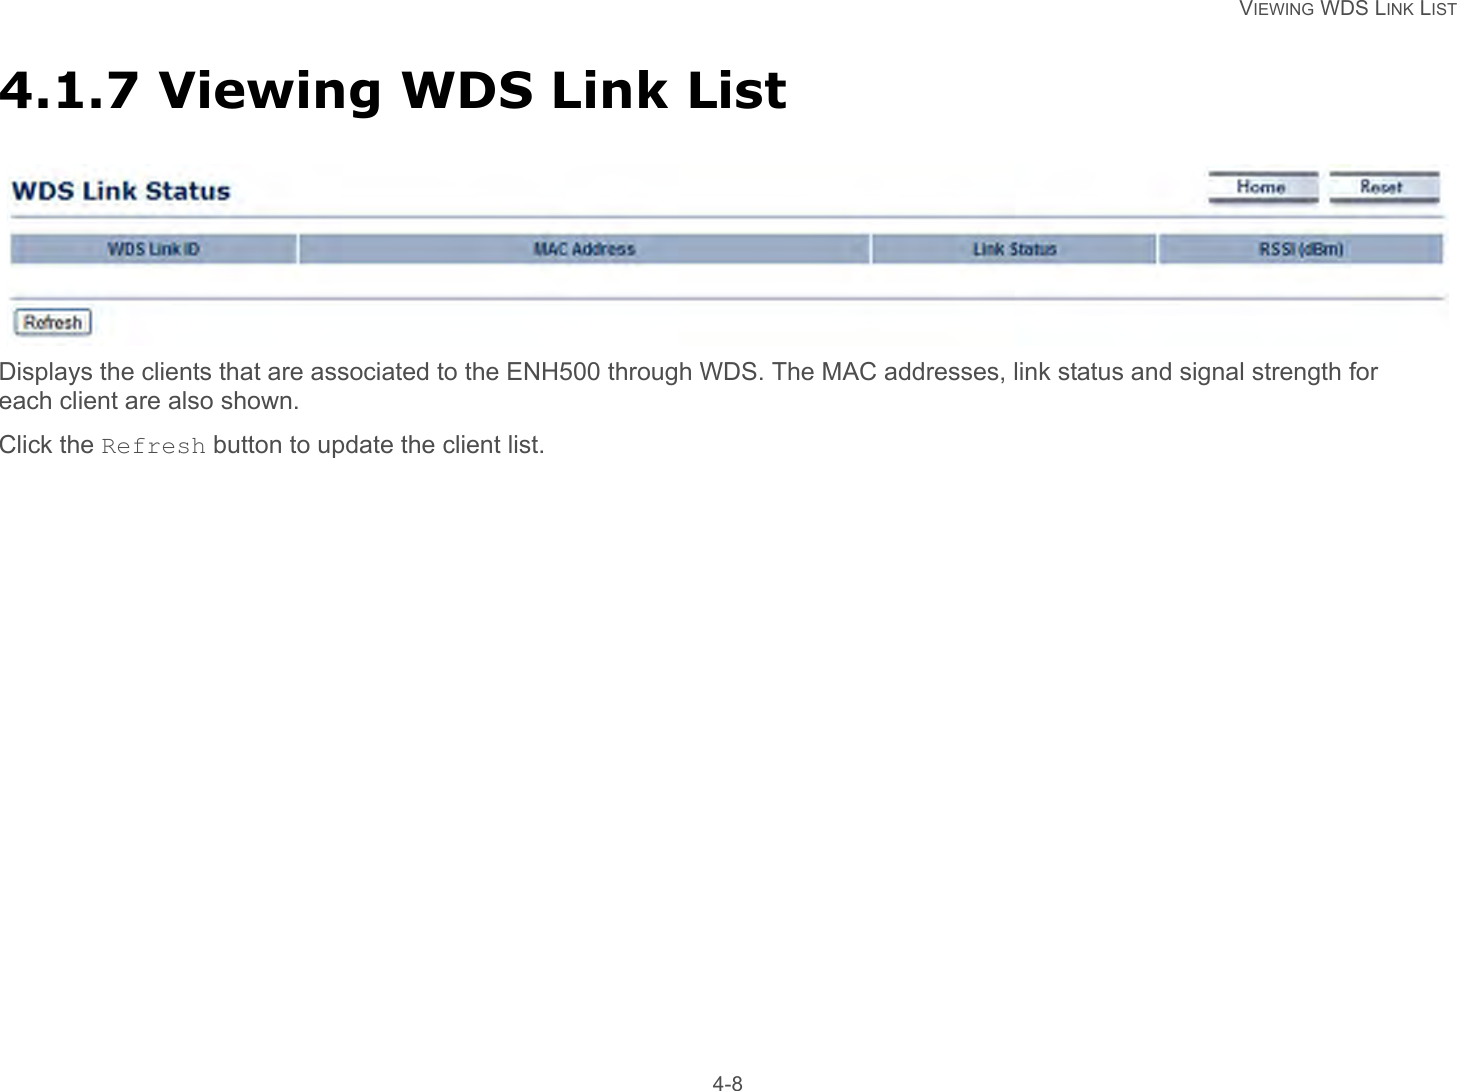   VIEWING WDS LINK LIST 4-84.1.7 Viewing WDS Link ListDisplays the clients that are associated to the ENH500 through WDS. The MAC addresses, link status and signal strength for each client are also shown.Click the Refresh button to update the client list.